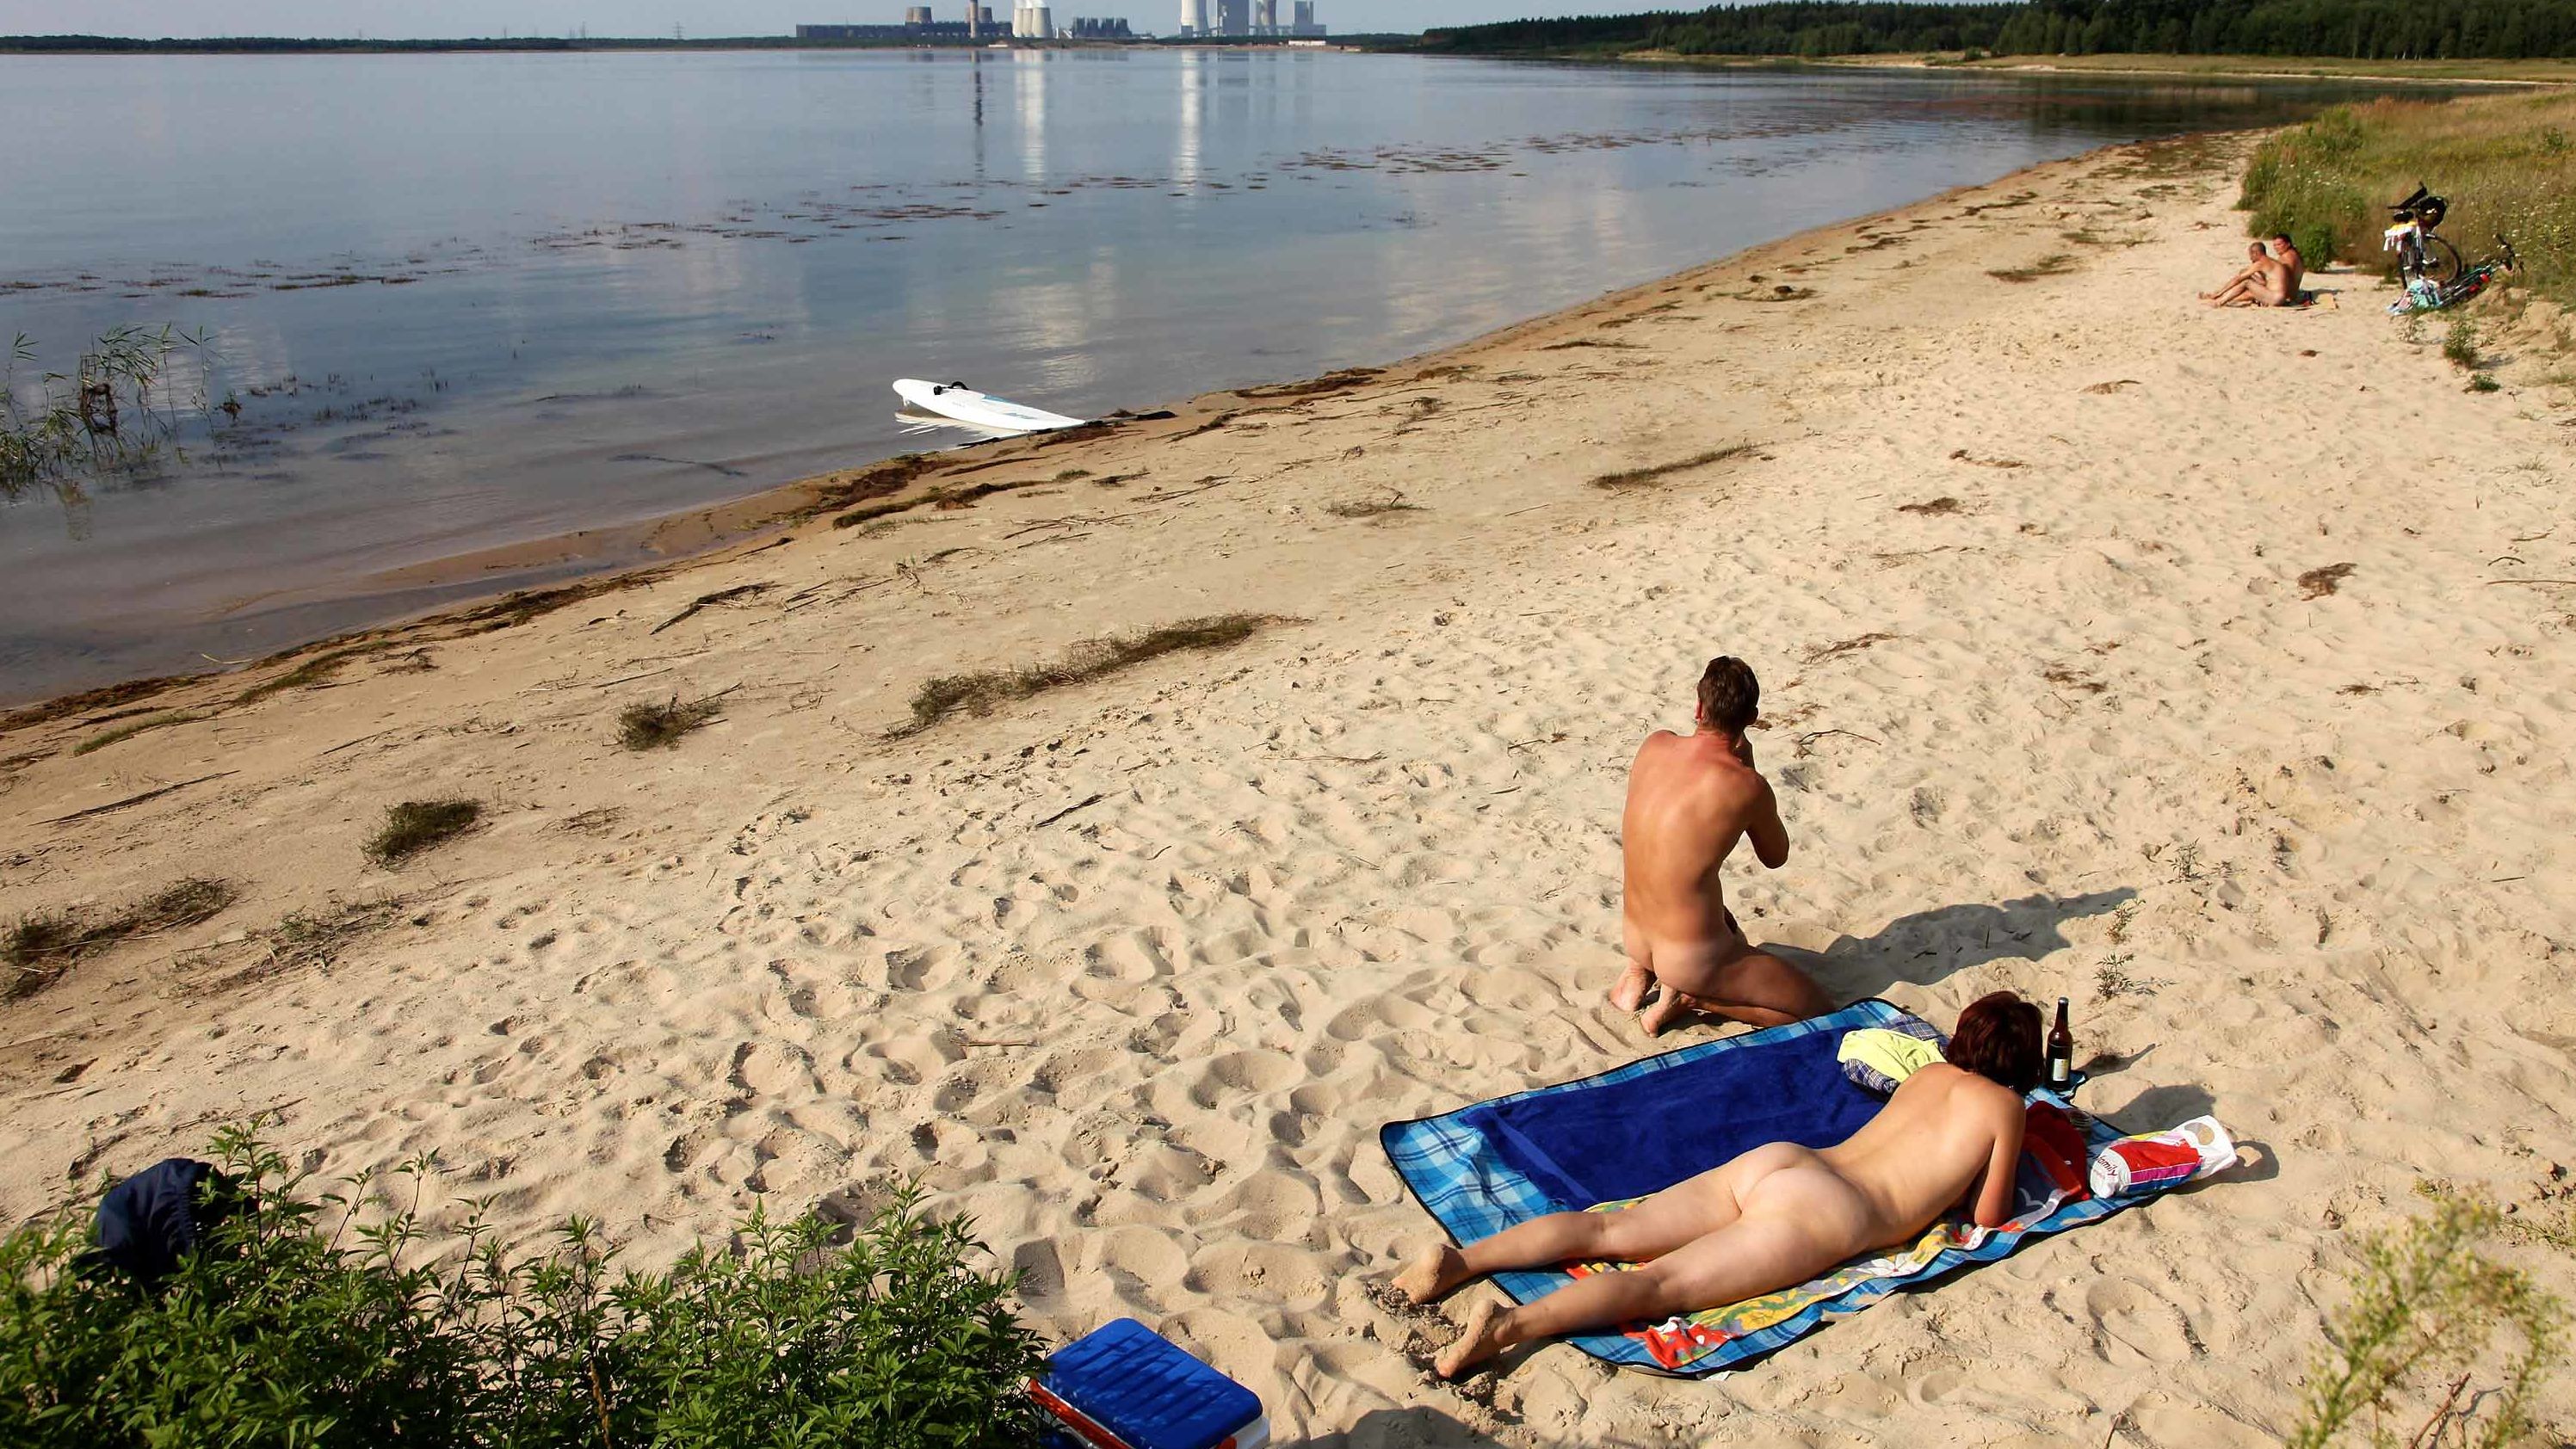 Nudist Resort For Married Couples - Nudity in Germany: The naked truth is revealed | CNN